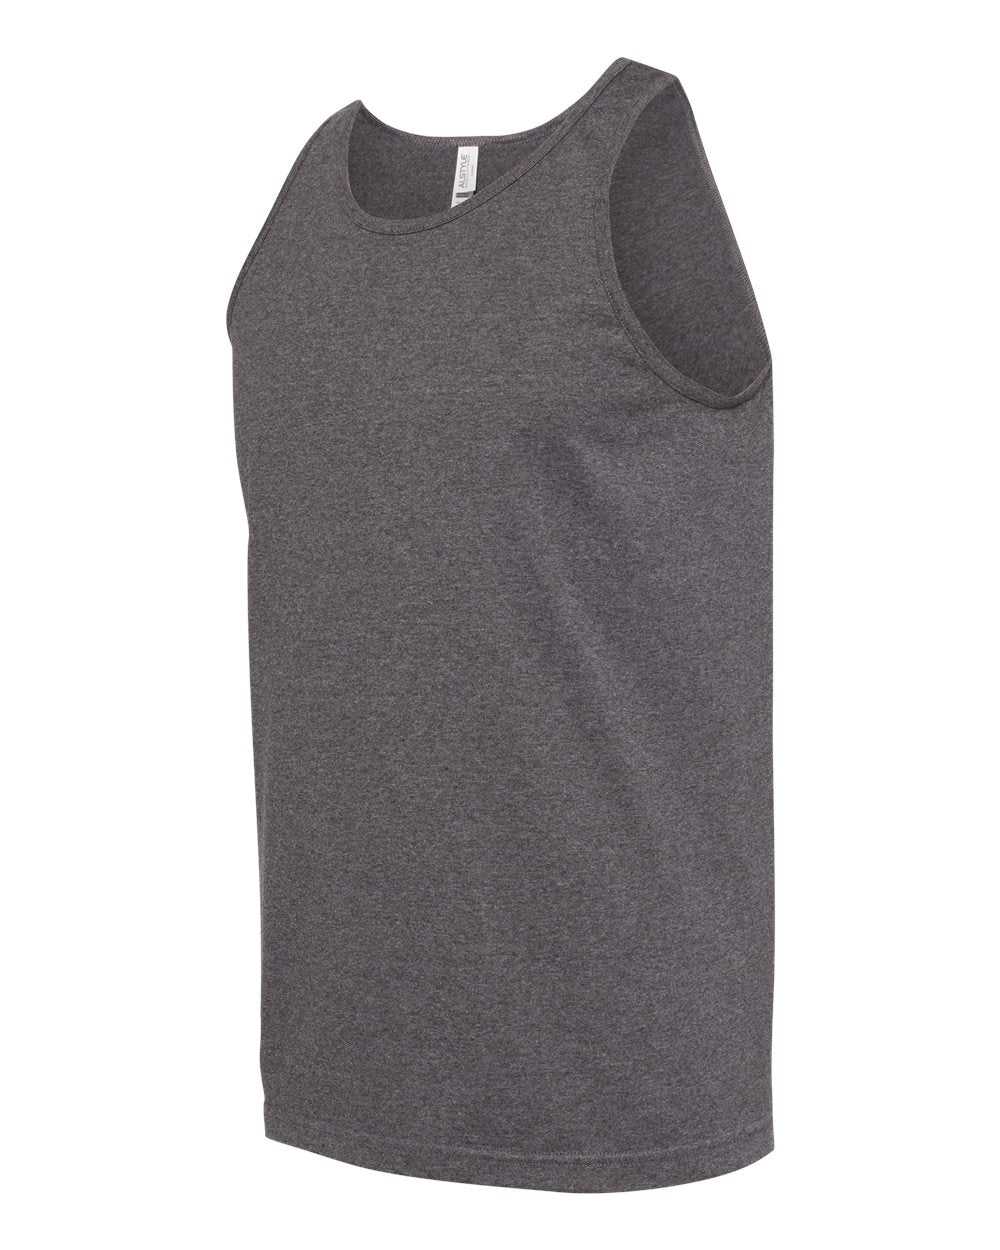 Alstyle 1307 Classic Adult Tank Top - Charcoal Heather - HIT a Double